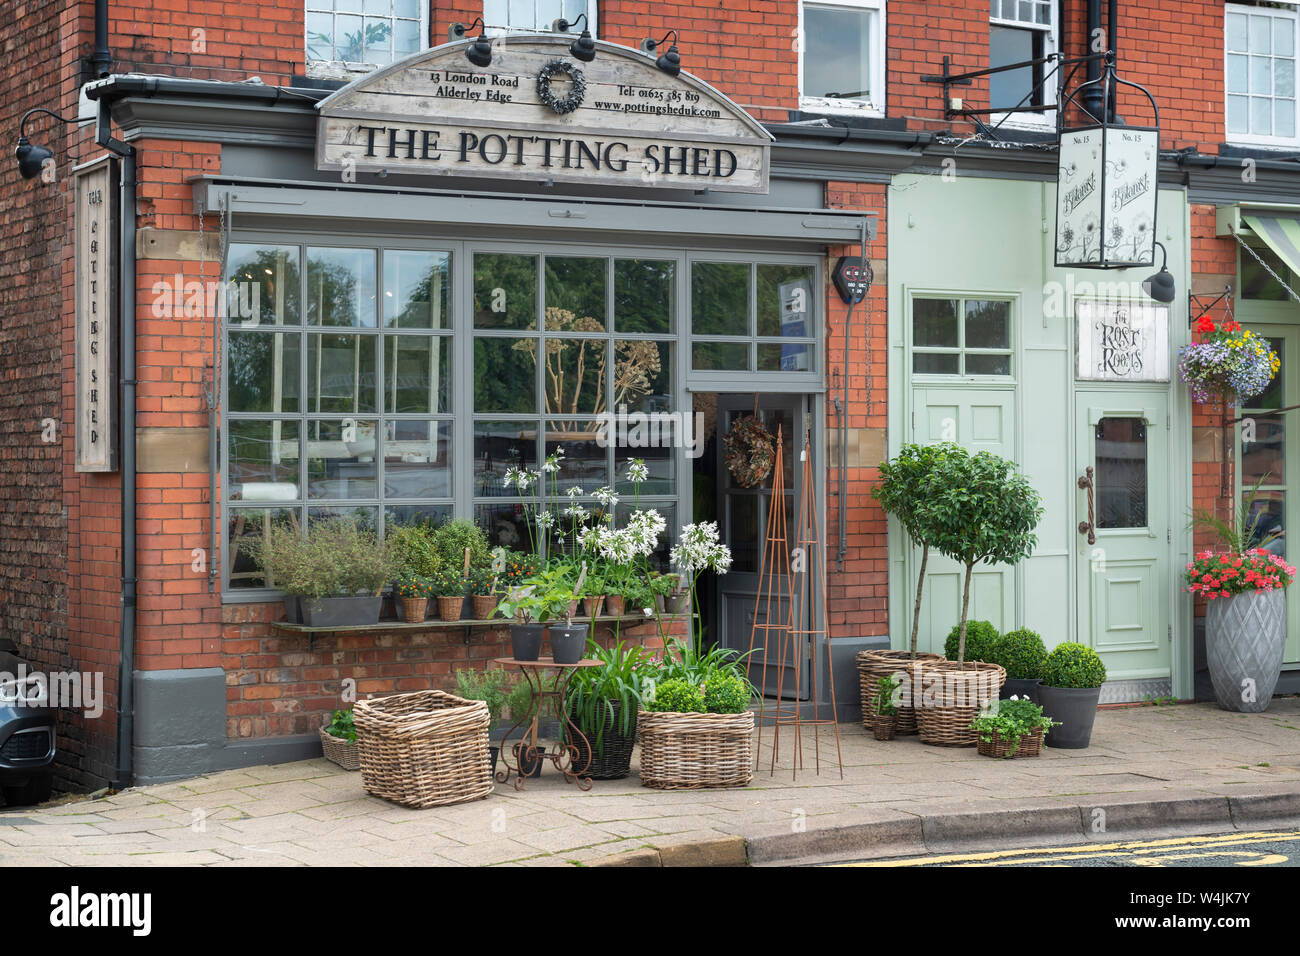 The Potting Shed shop in the small town of Alderley Edge in Cheshire, UK. Stock Photo